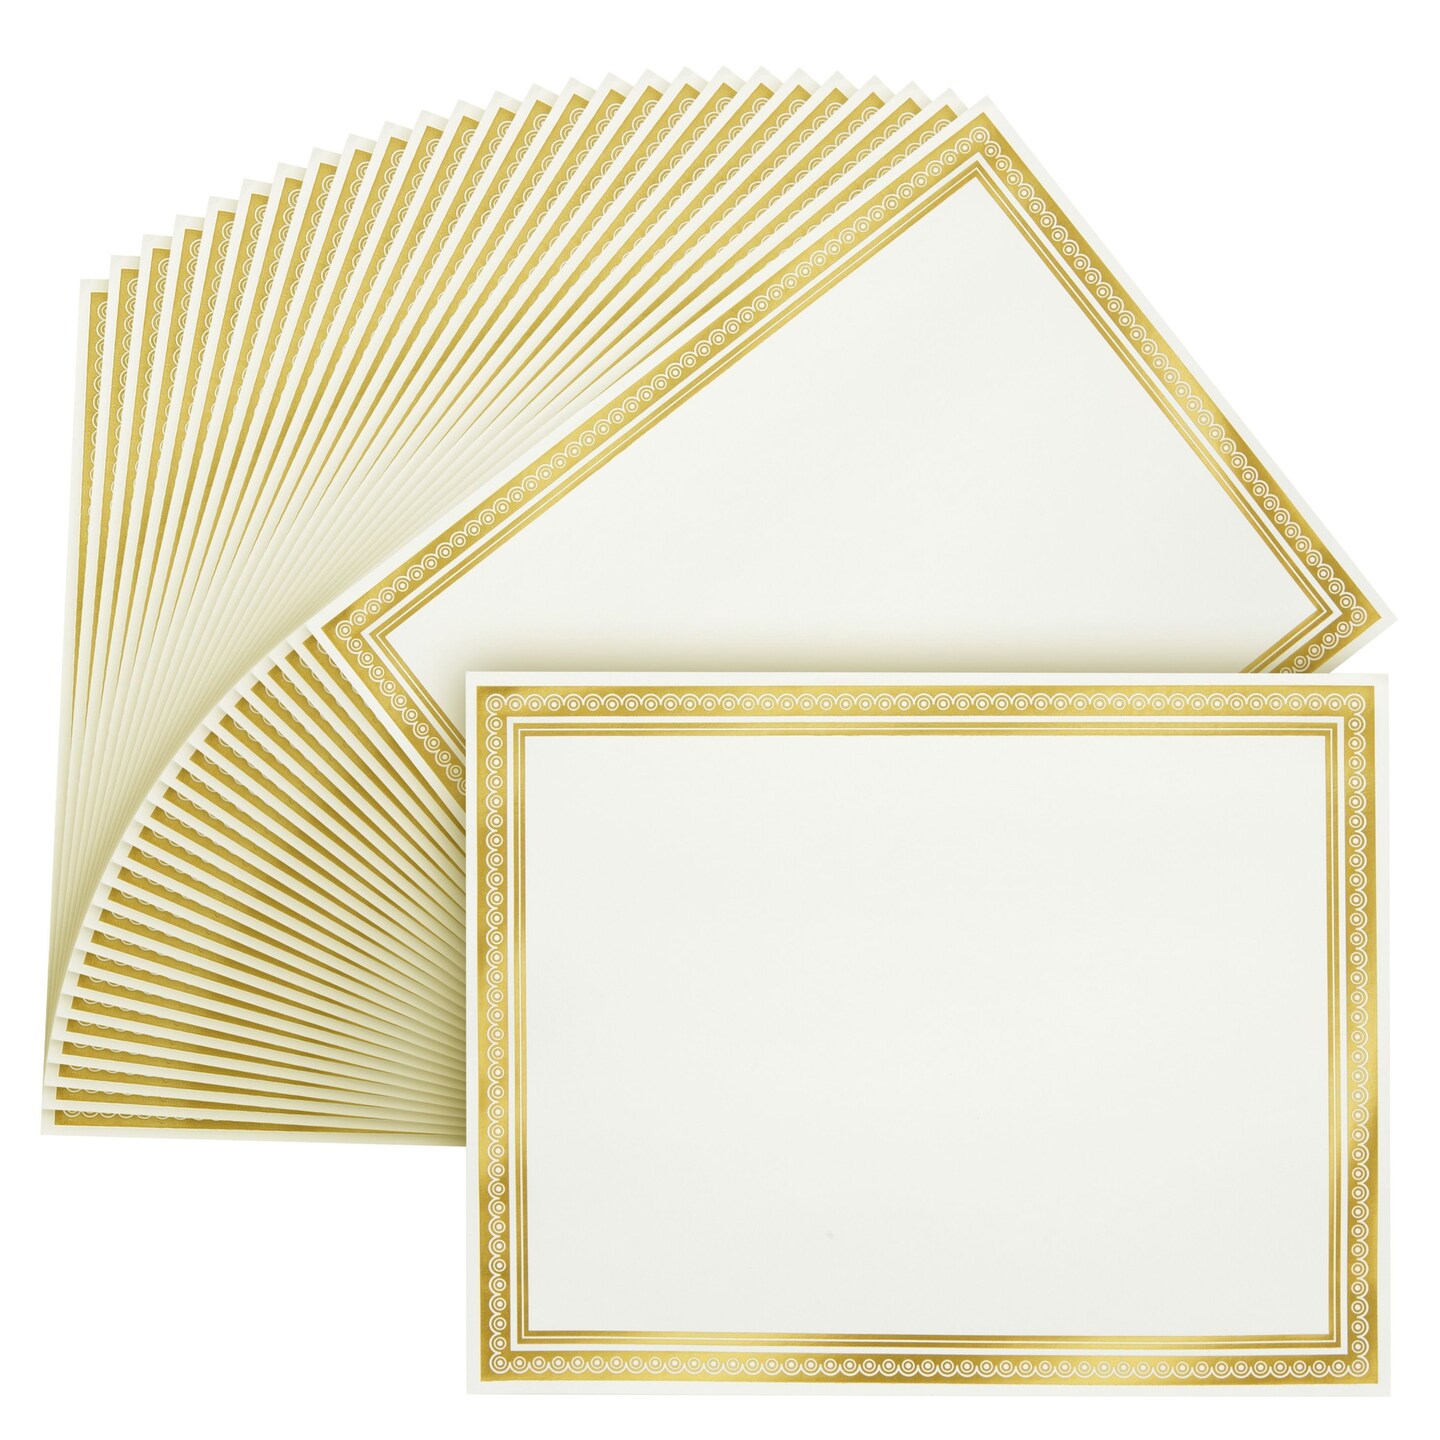 50 Sheets Gold Foil Certificate Paper for Printing - Customizable